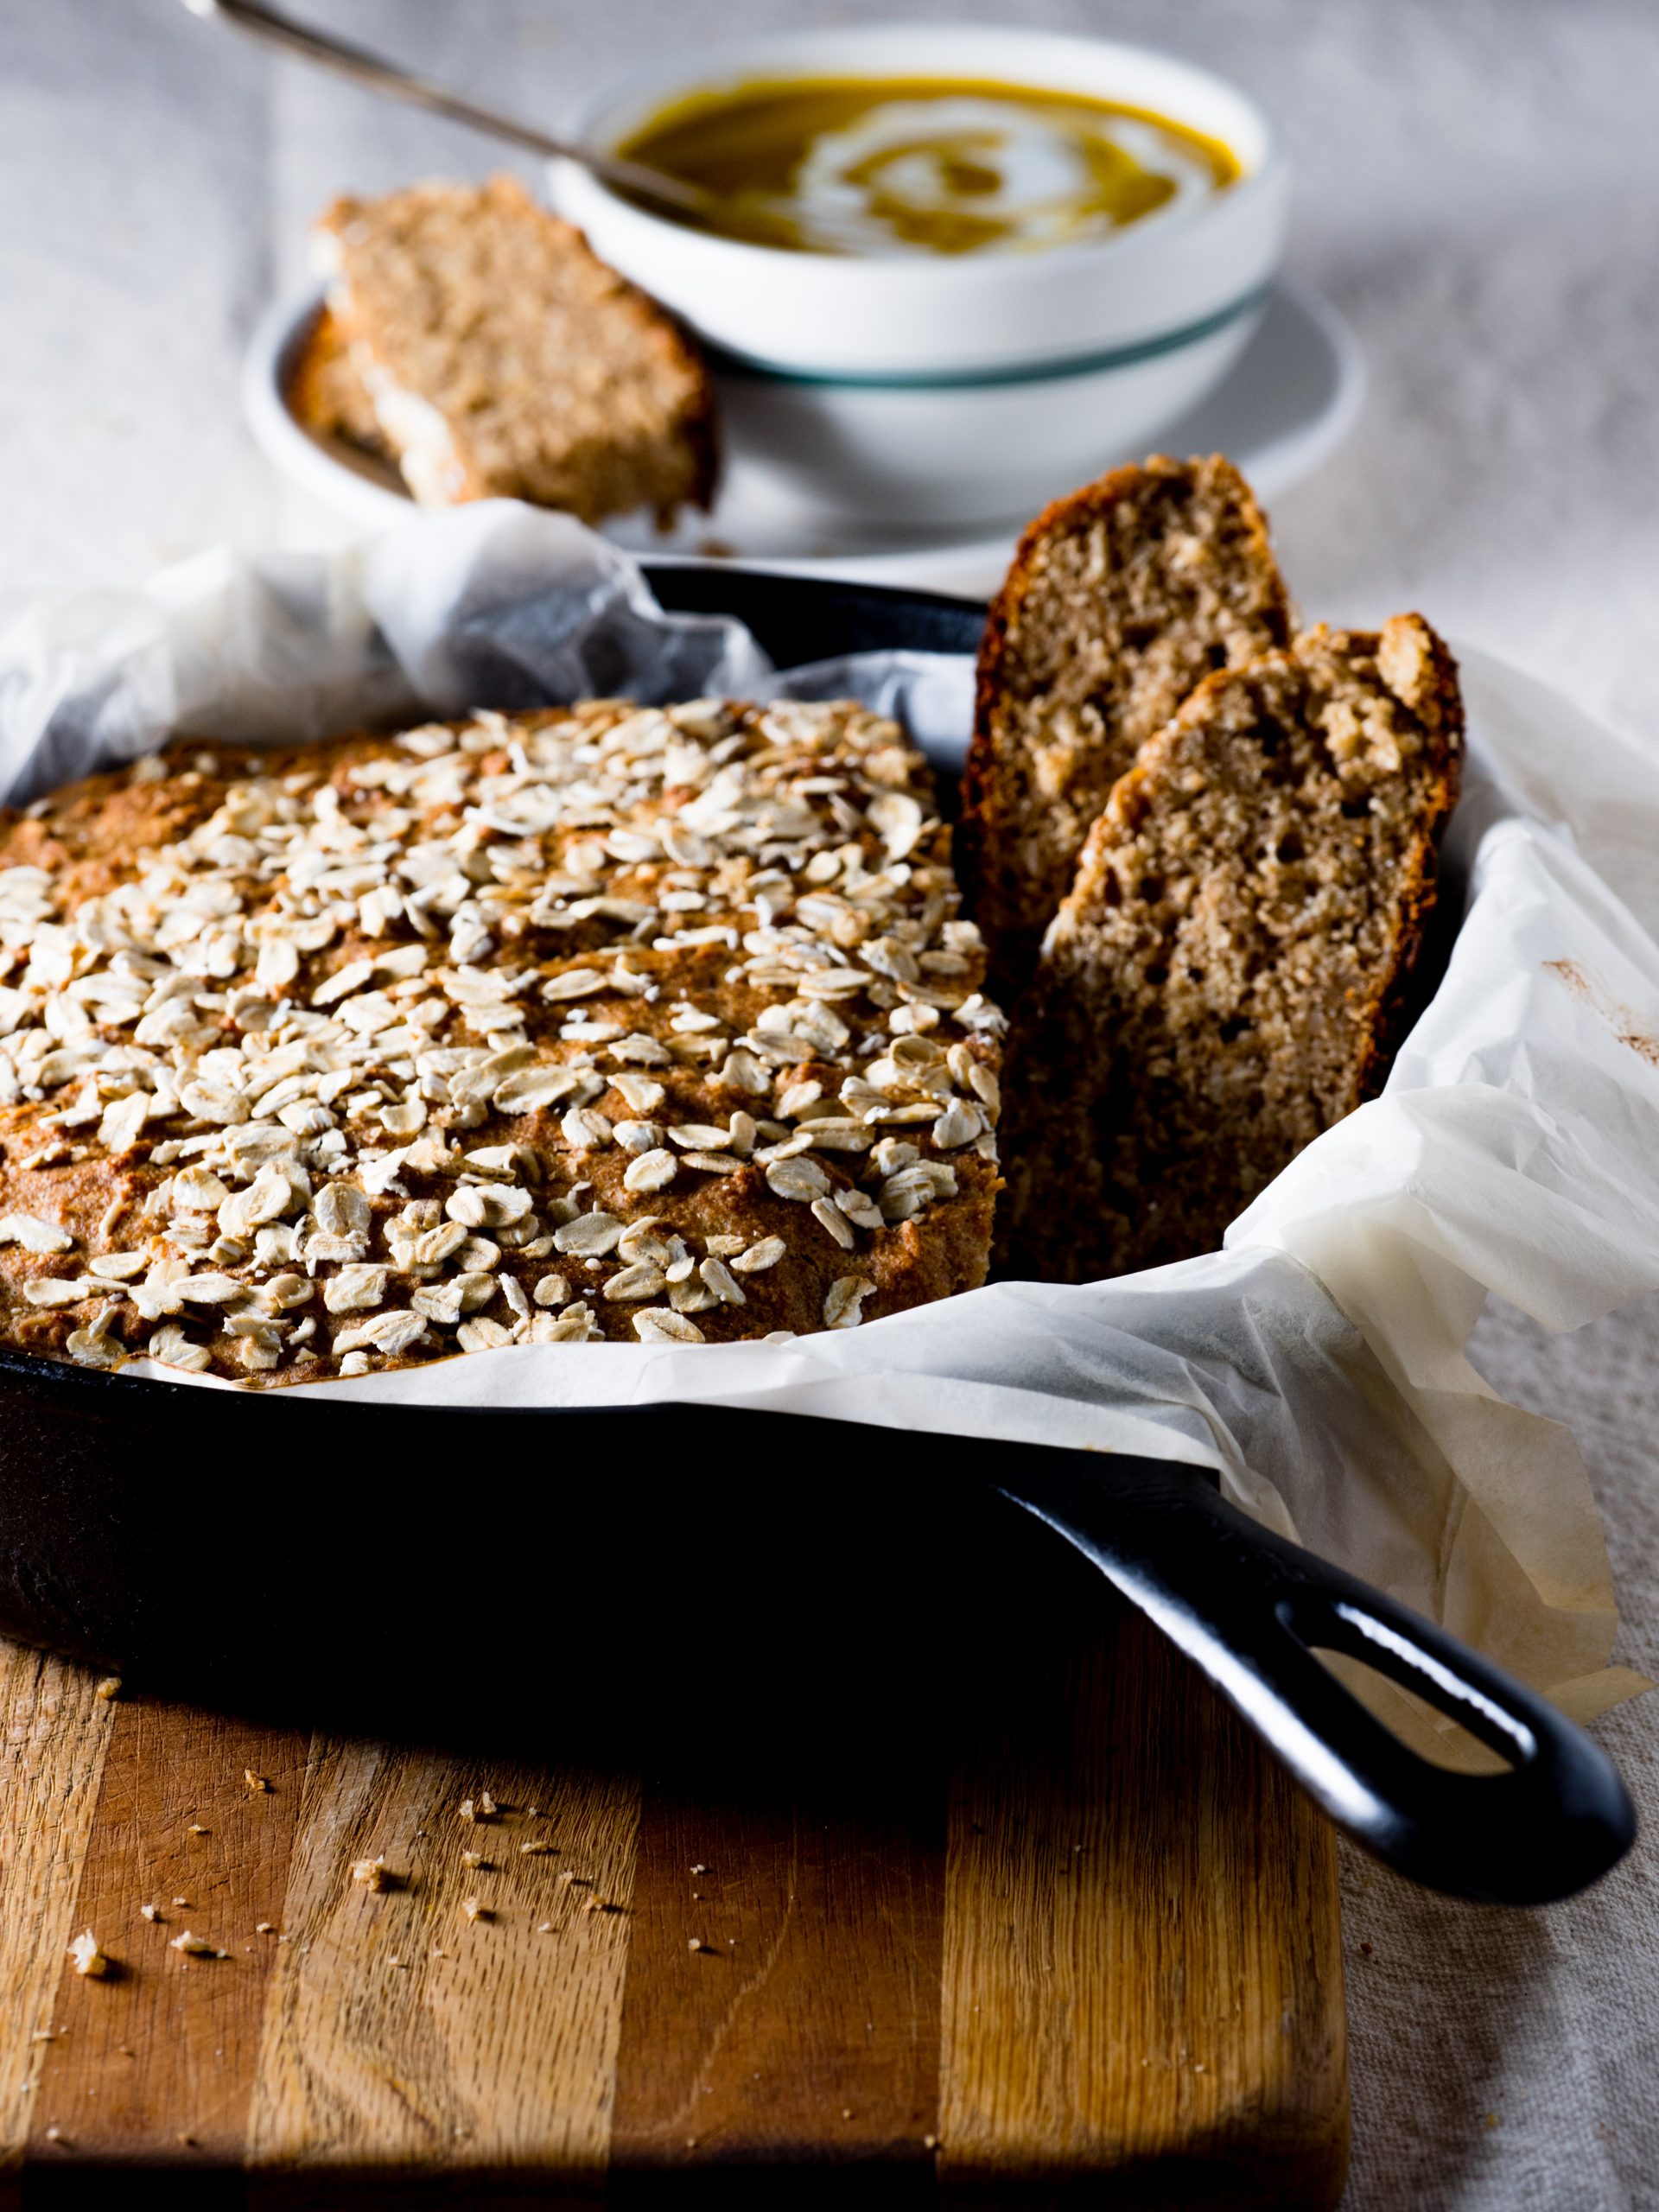 https://goodly.ca/wp-content/uploads/2021/03/Oatmeal-and-Honey-Soda-Bread-scaled.jpg